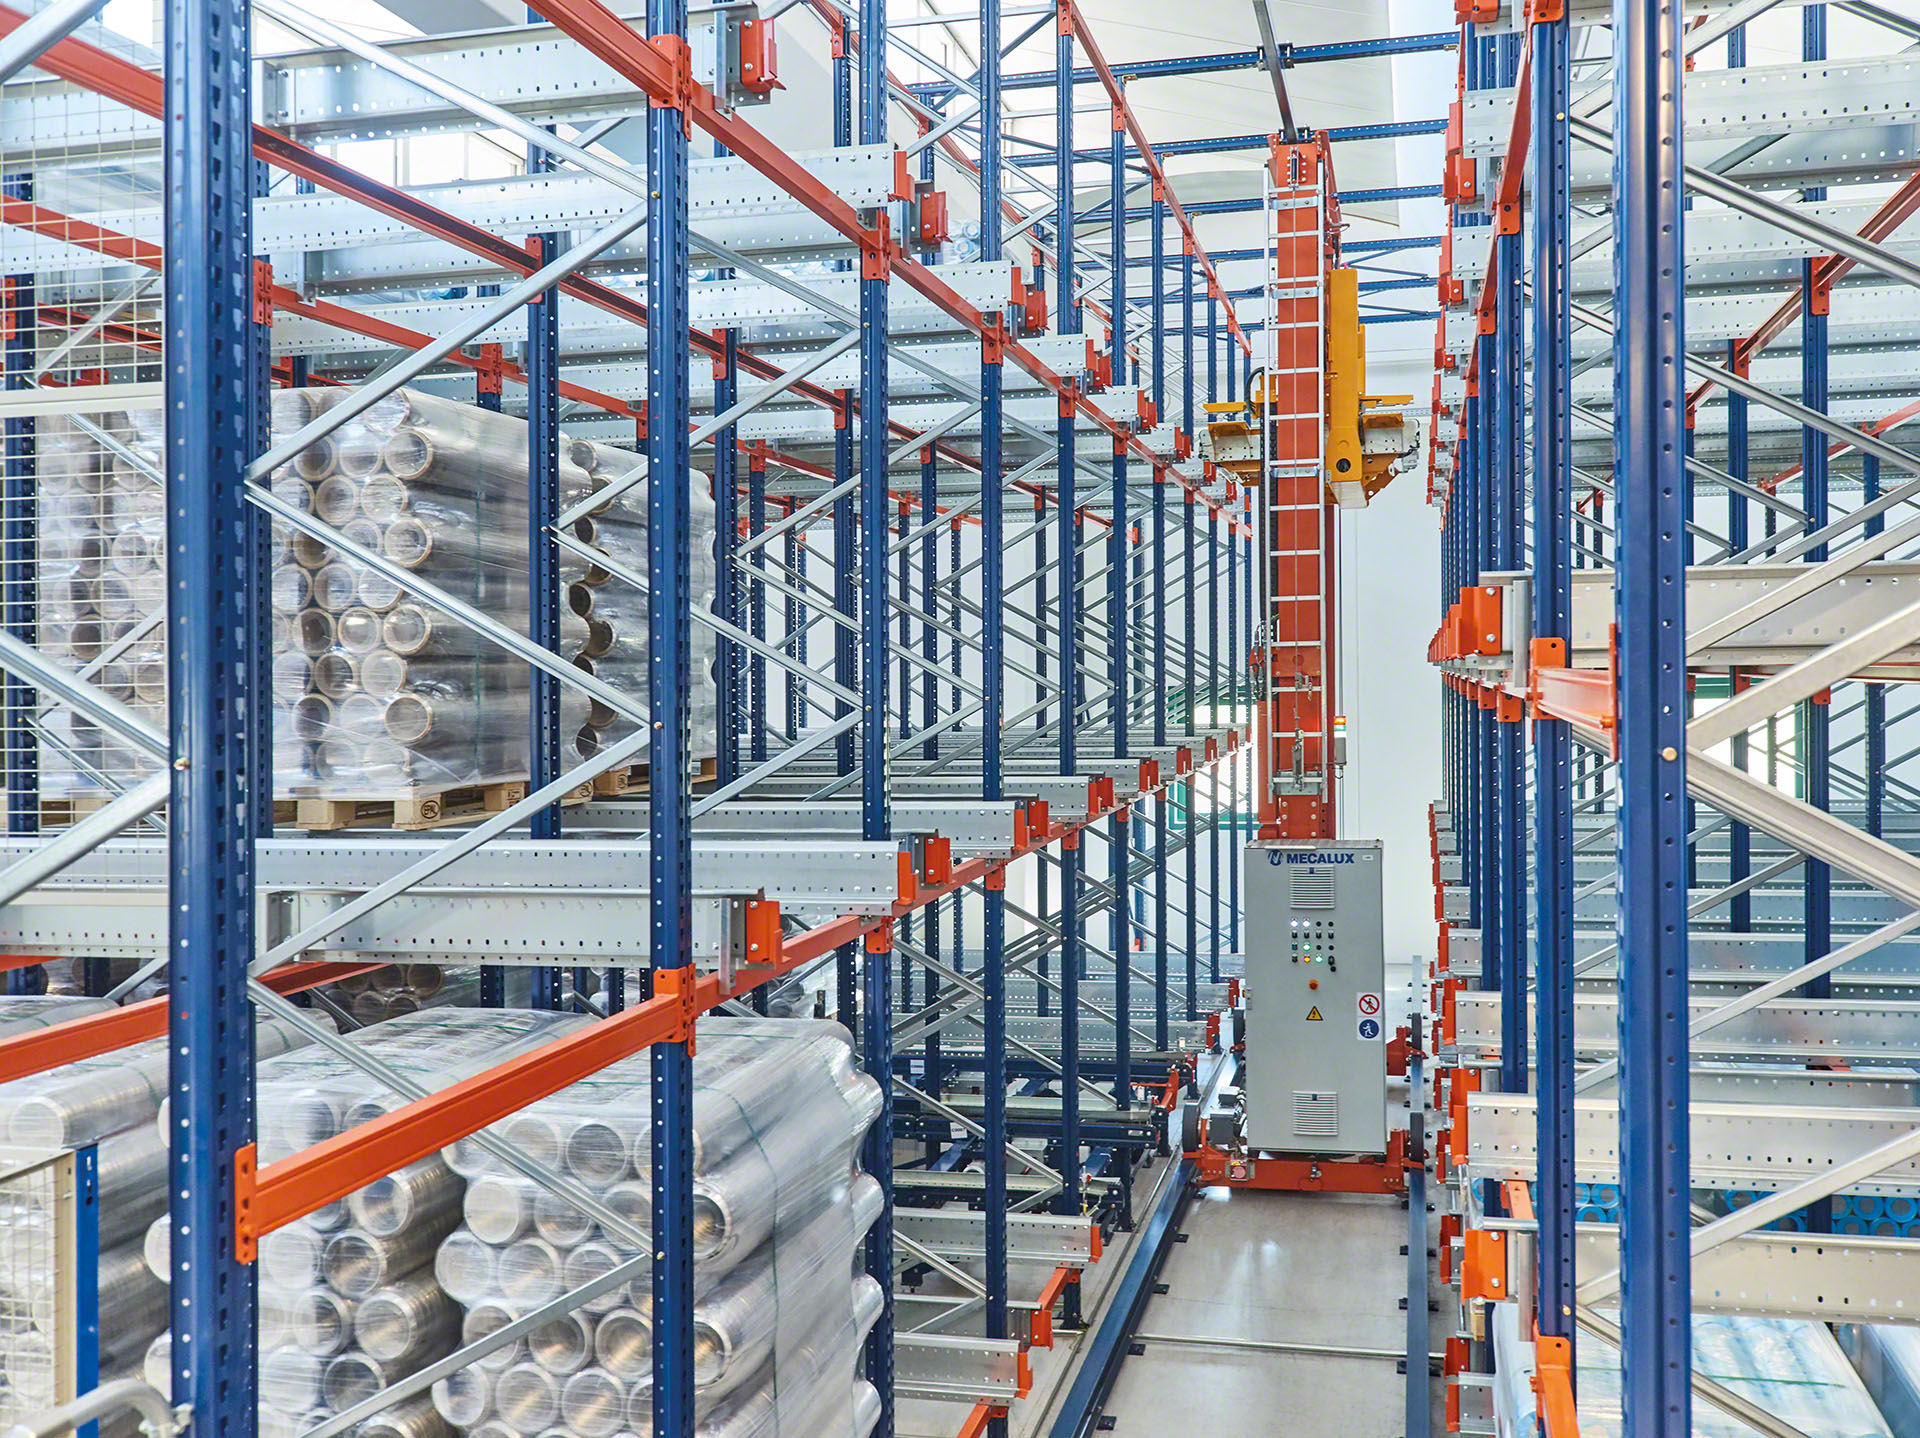 In automated warehouses, the APS is the ideal system for automating pallet loading and unloading